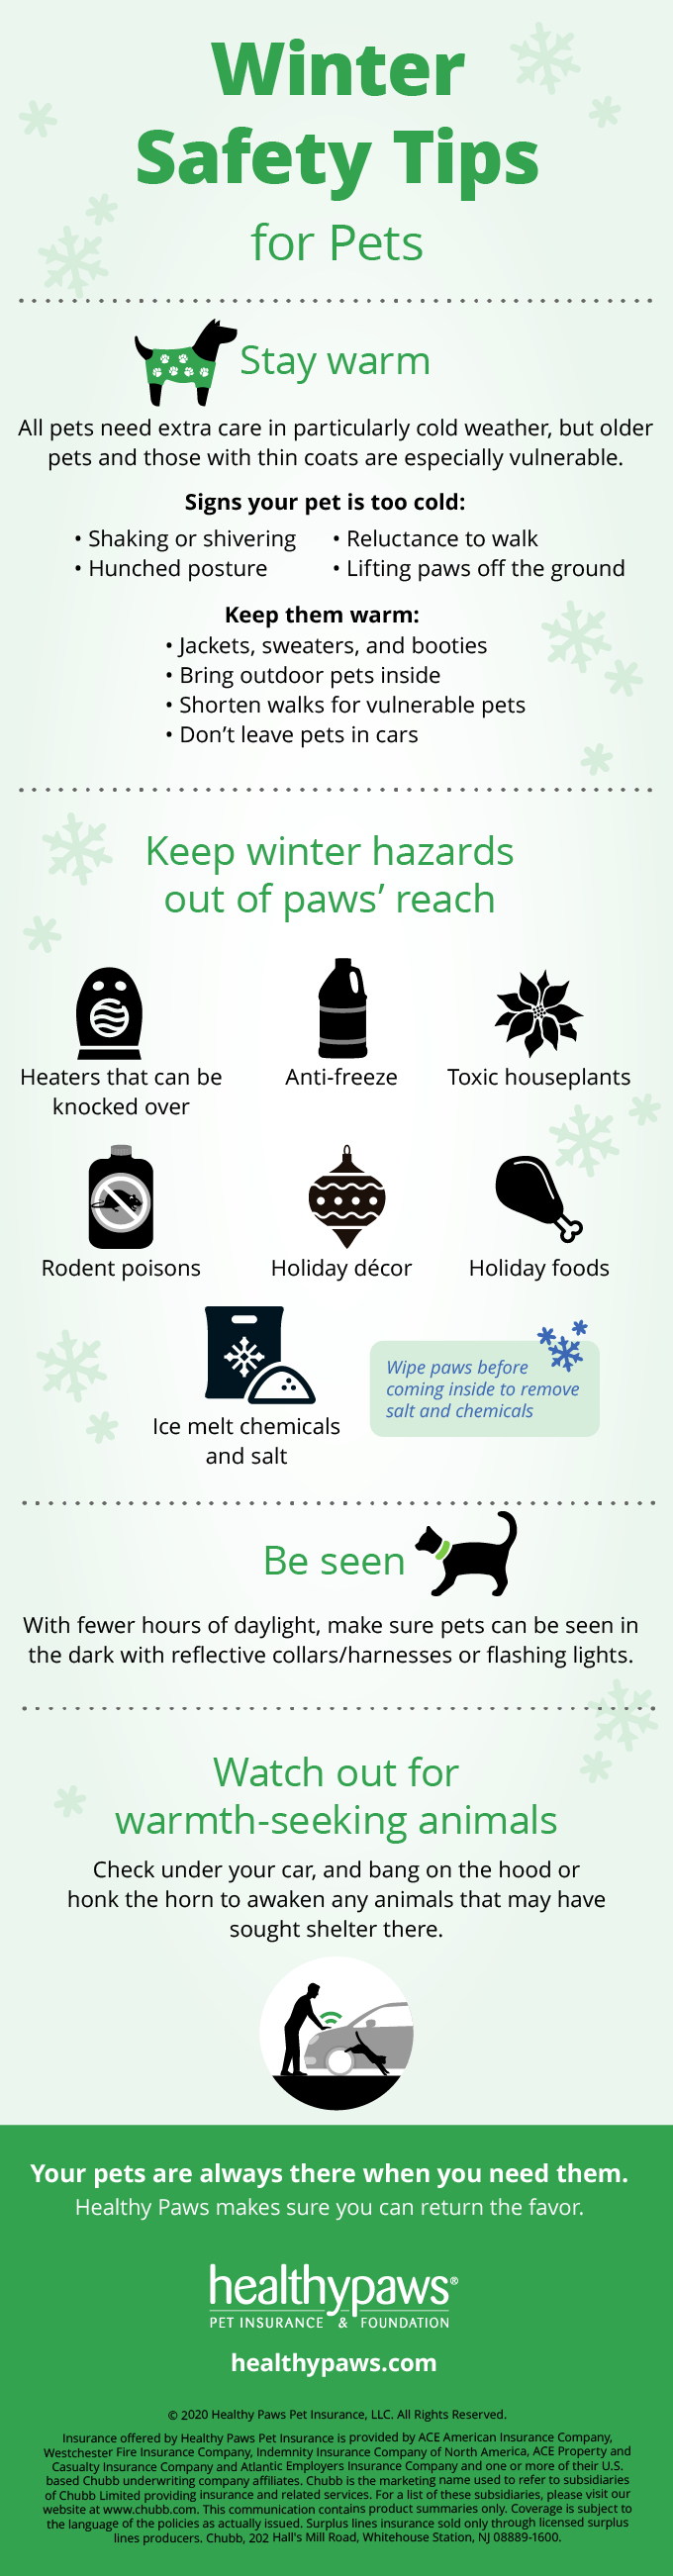 Infographic: Winter Safety Tips for Pets - Healthy Paws Pet Insurance